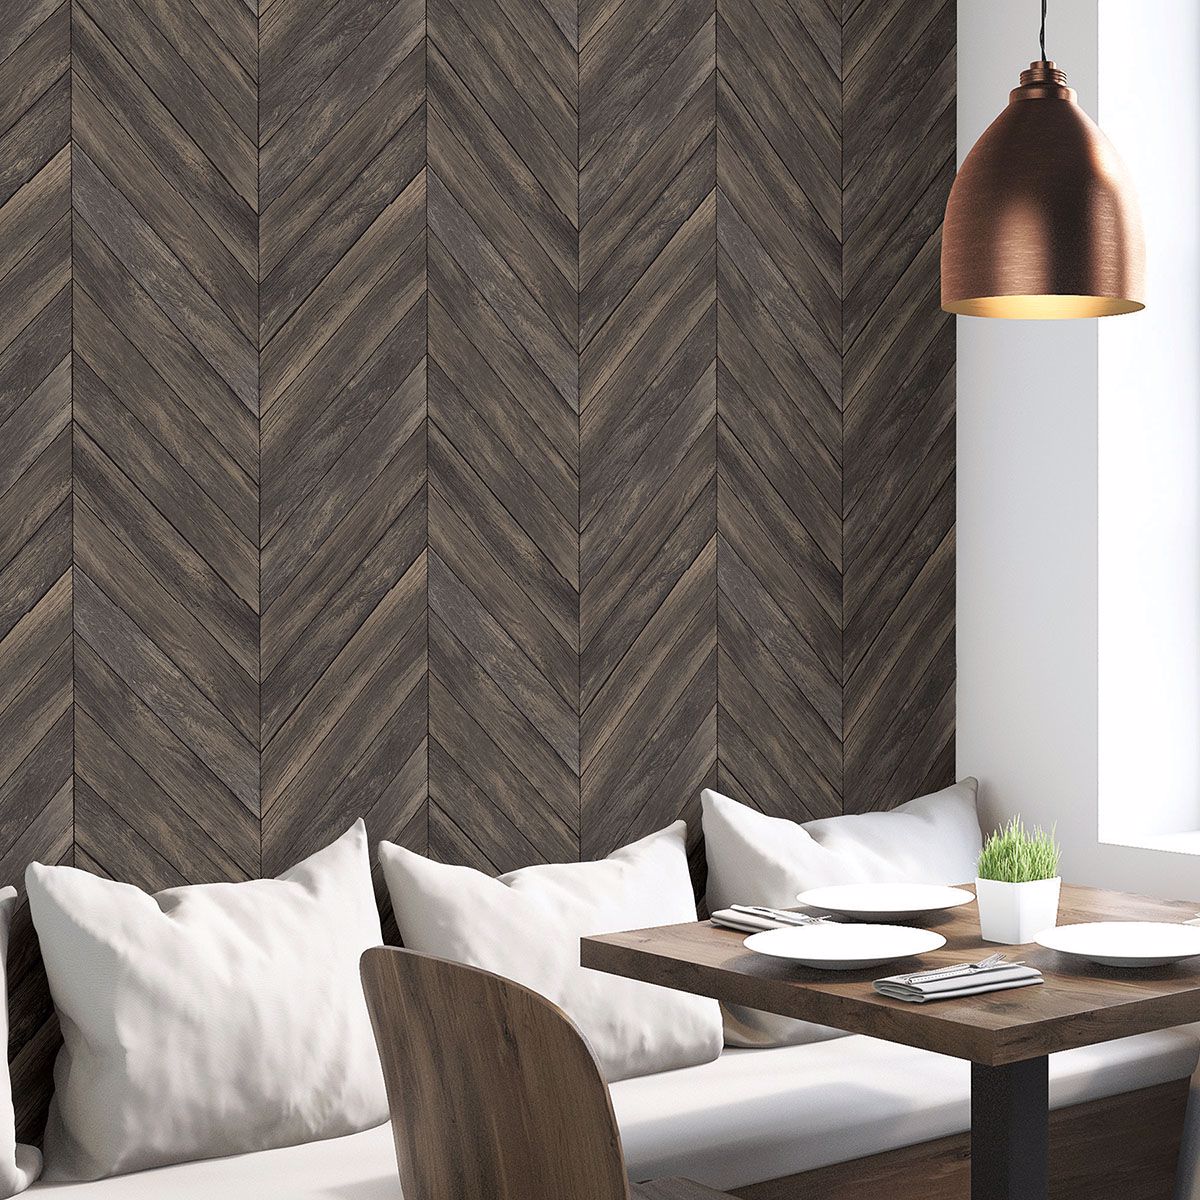 NH3064 - Wildwood Walnut Peel and Stick Wallpaper - by InHome